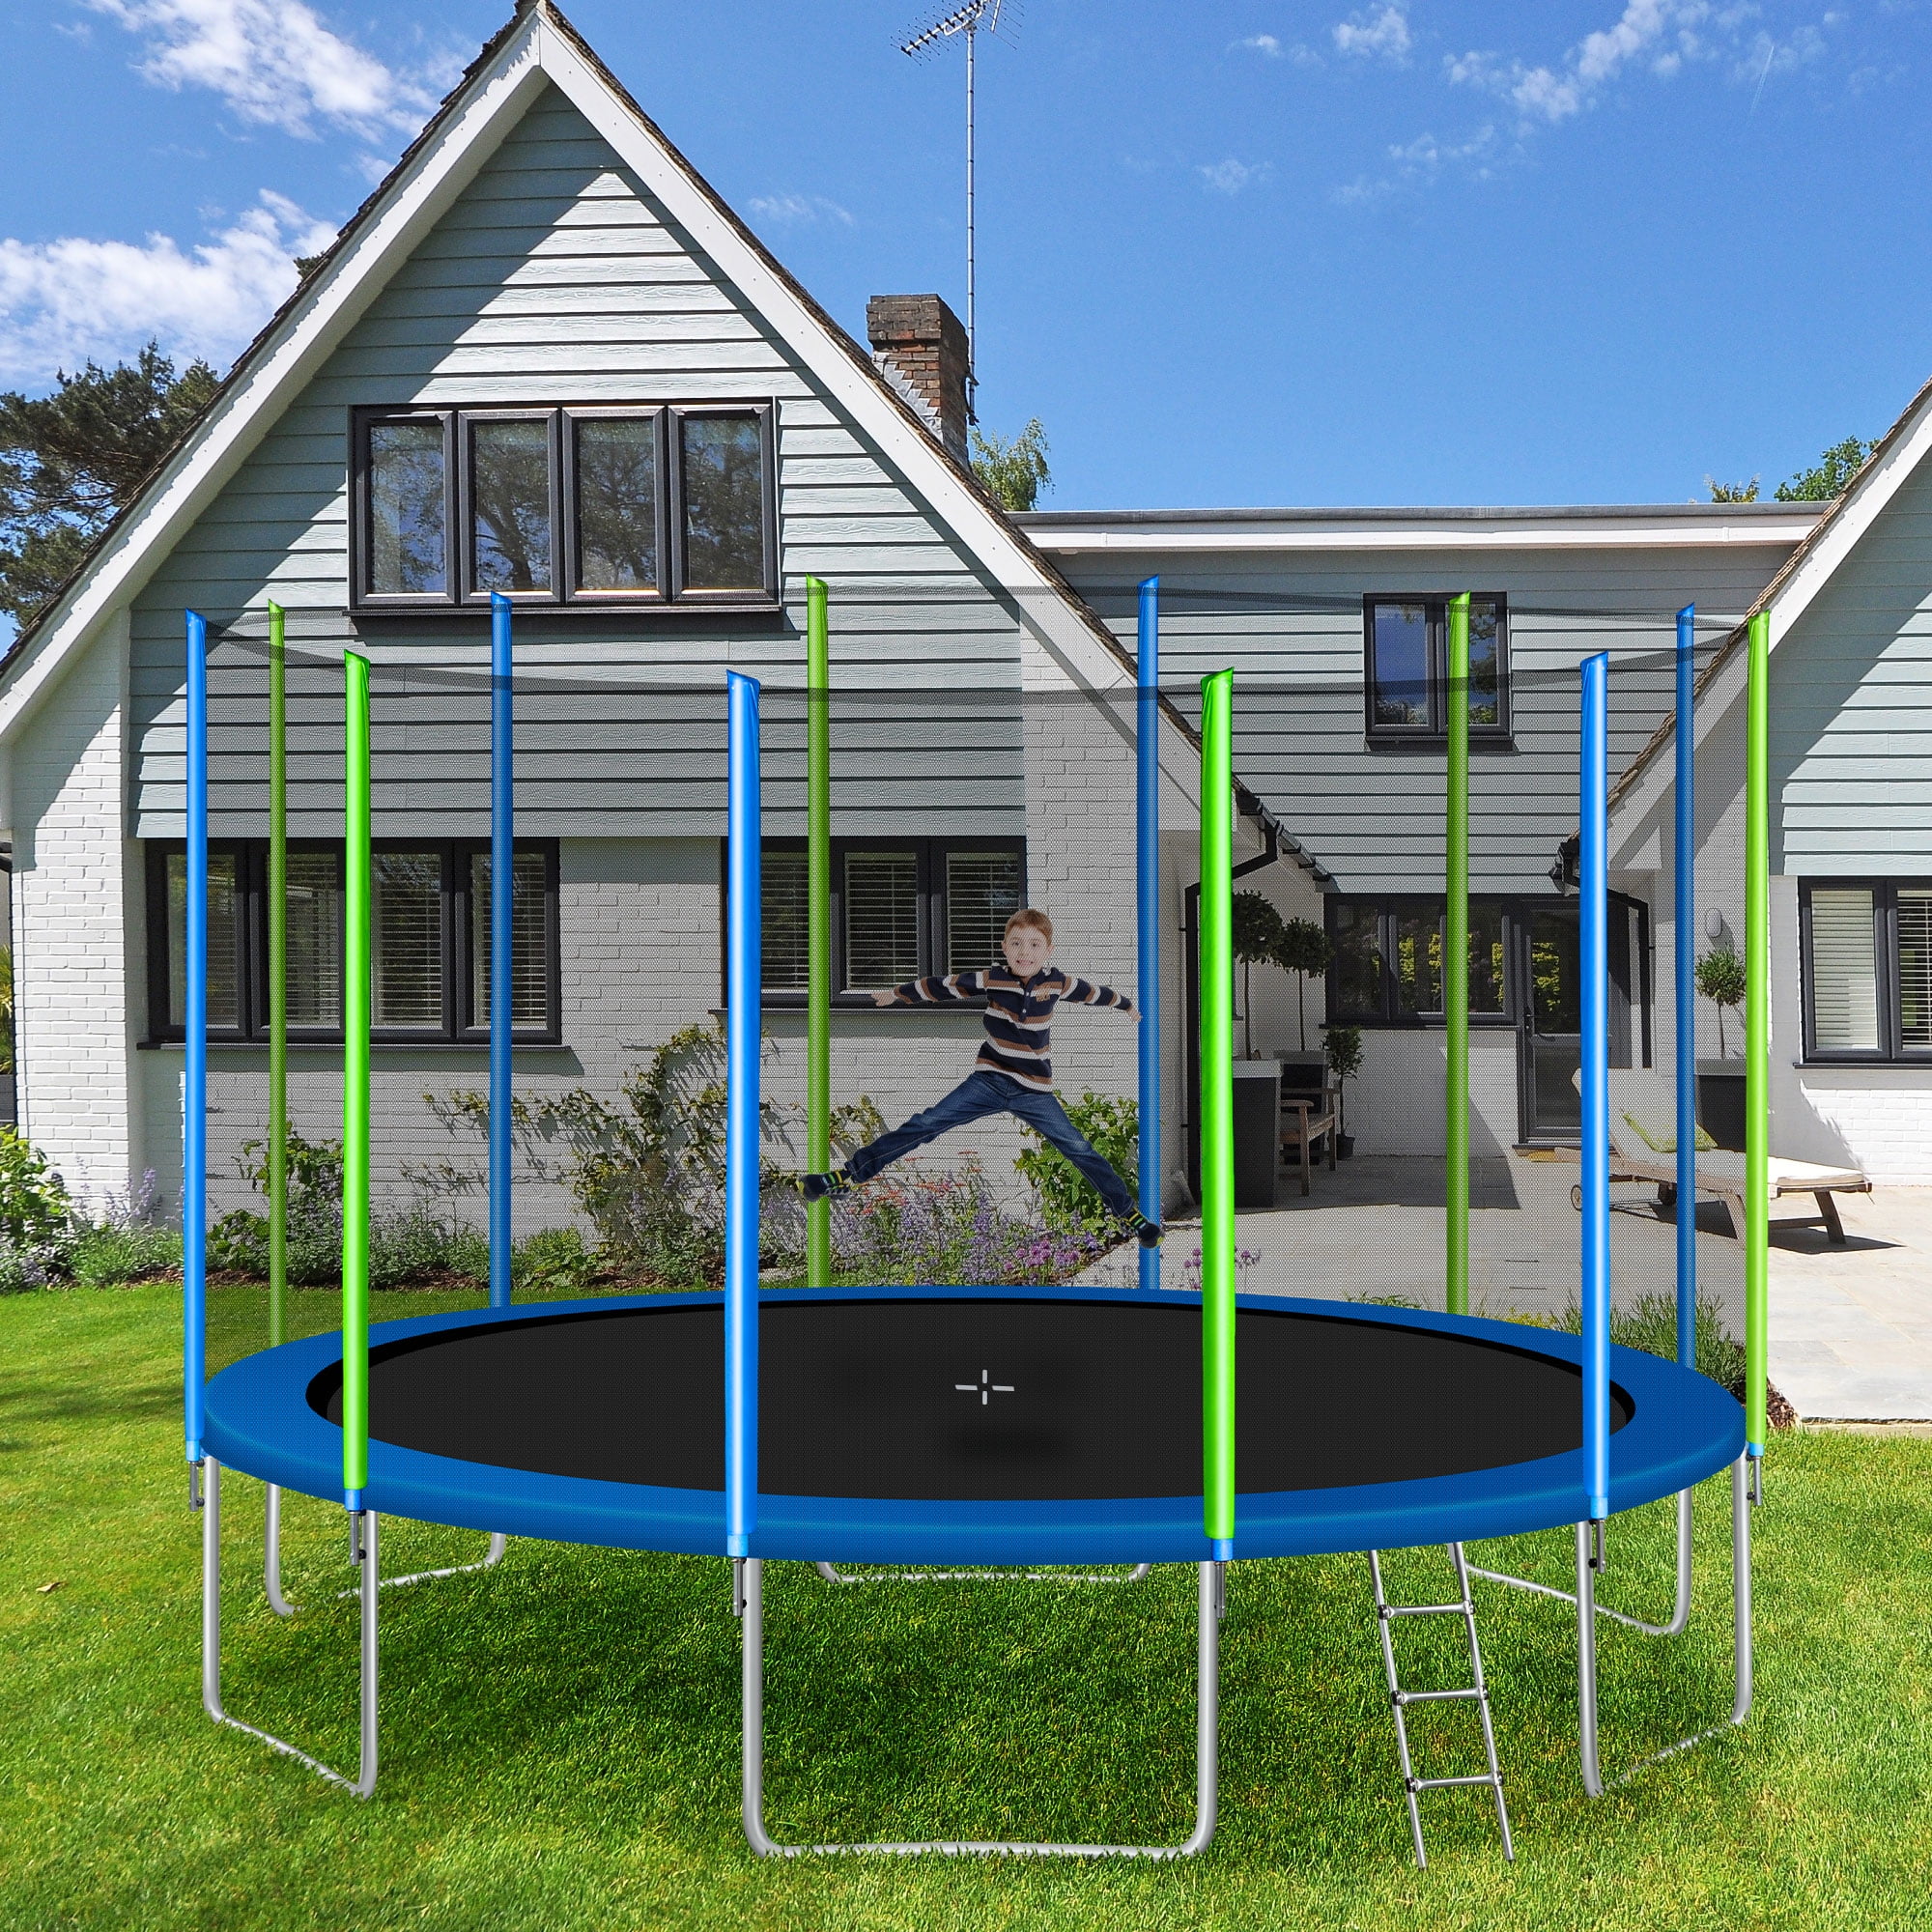 Details about   16FT Outdoor Trampoline Basketball Trampoline Combo Home Trampoline Green 